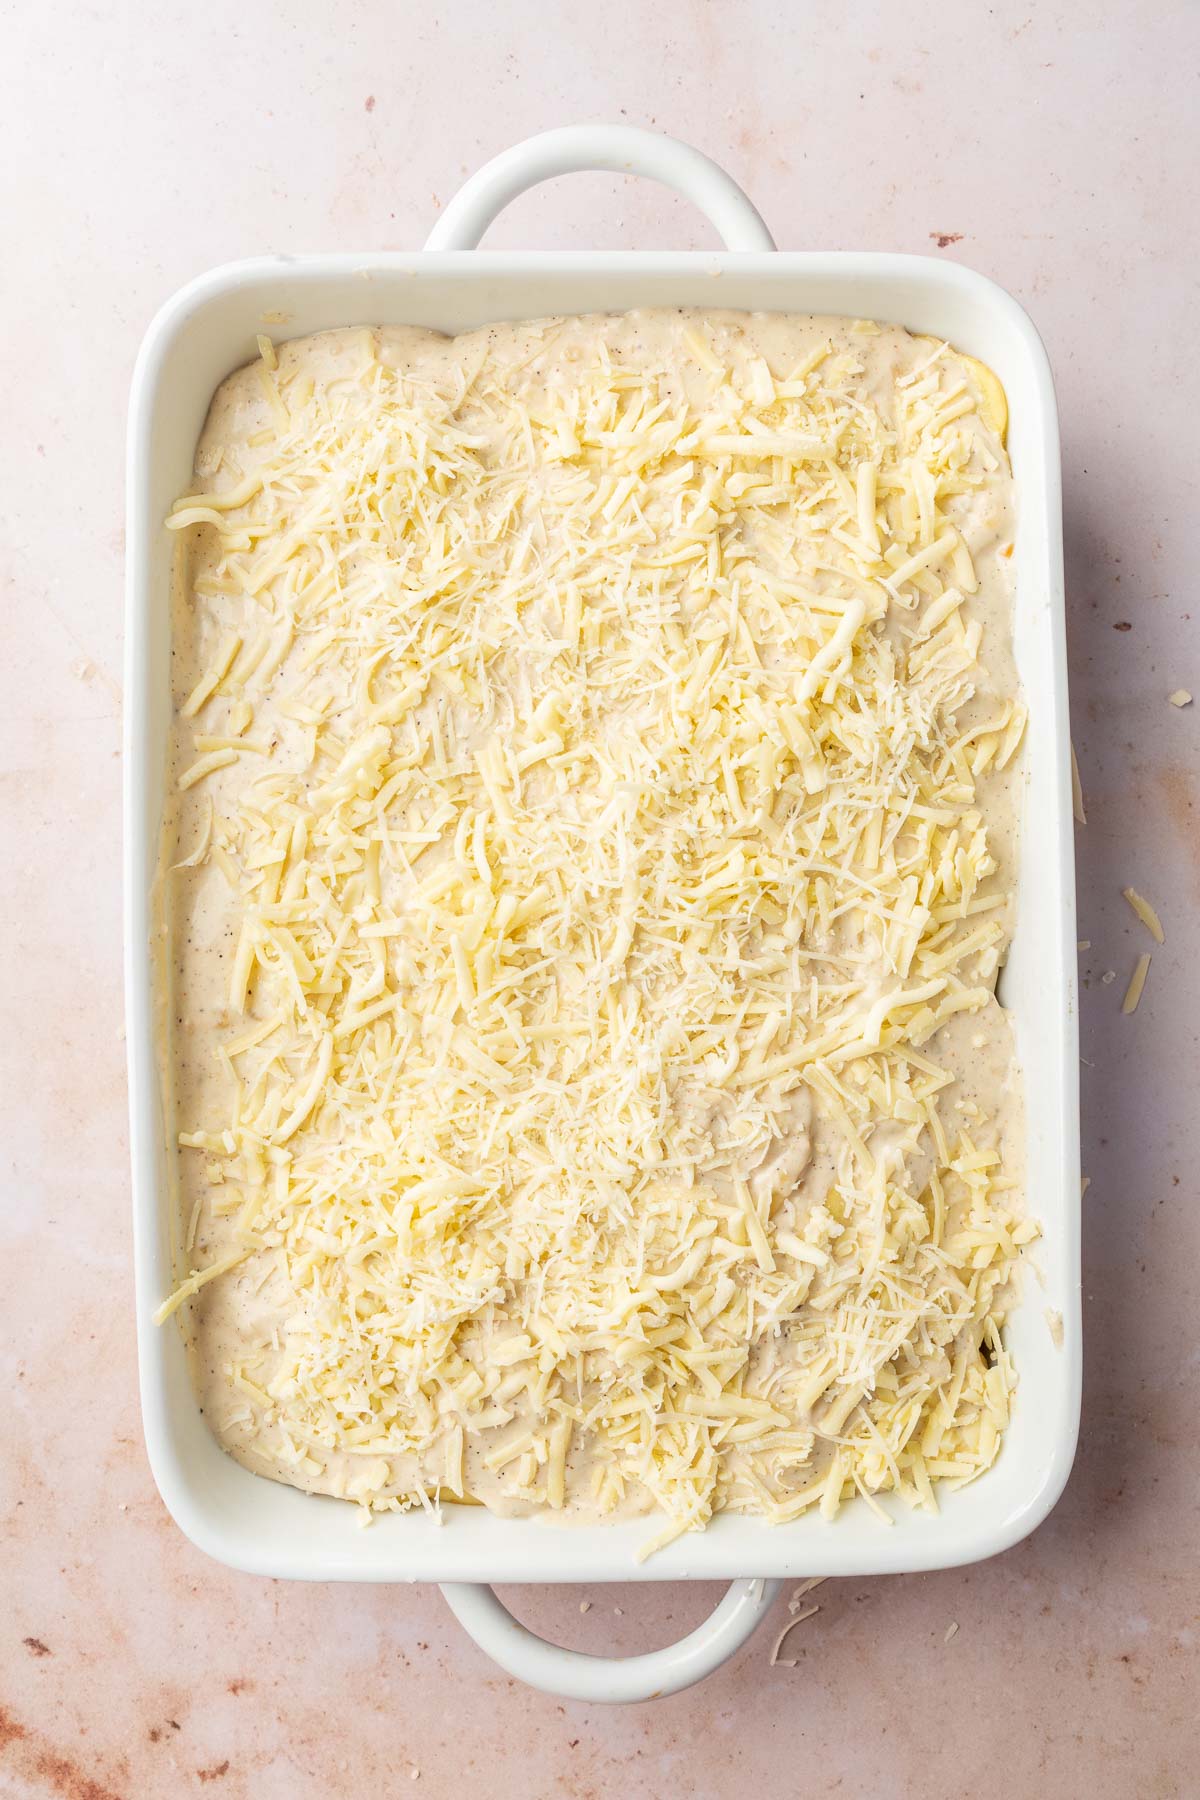 A rectangular baking dish with layers of gluten-free cream sauce topped with shredded white cheddar cheese and shredded parmesan cheese.